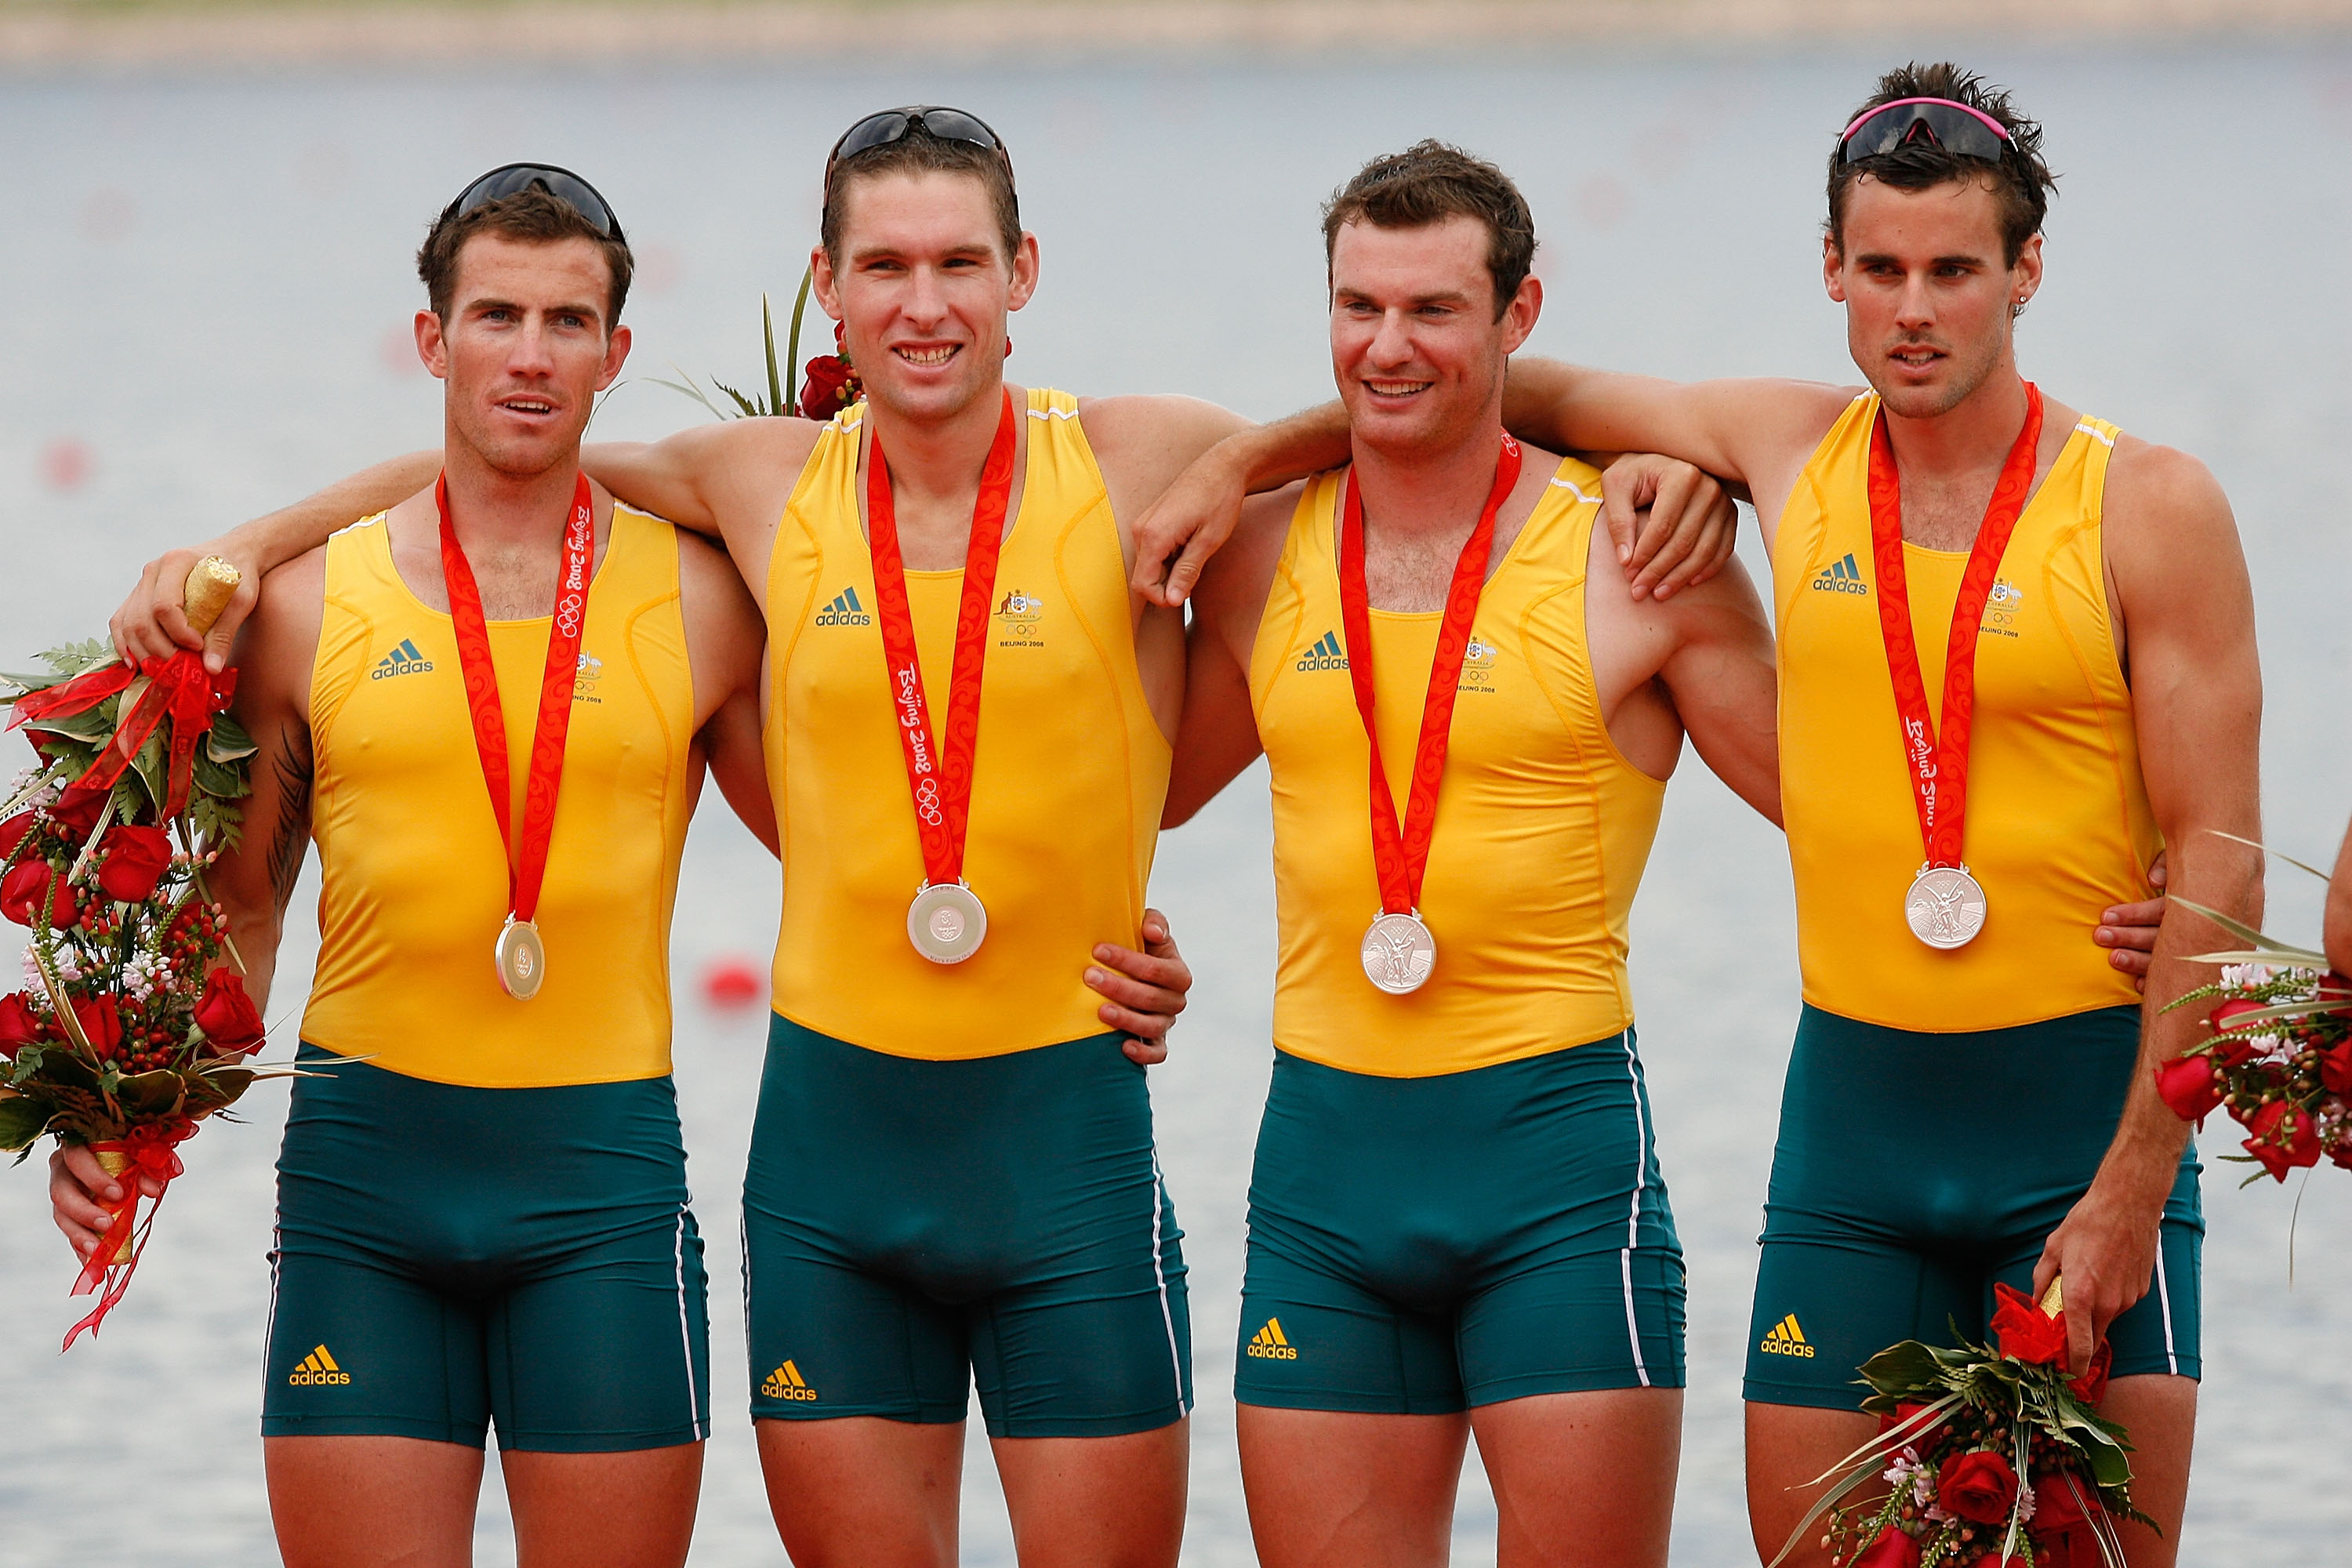 The Australian men’s four pose with their silver medals at the 2008 Beijing Olympics.